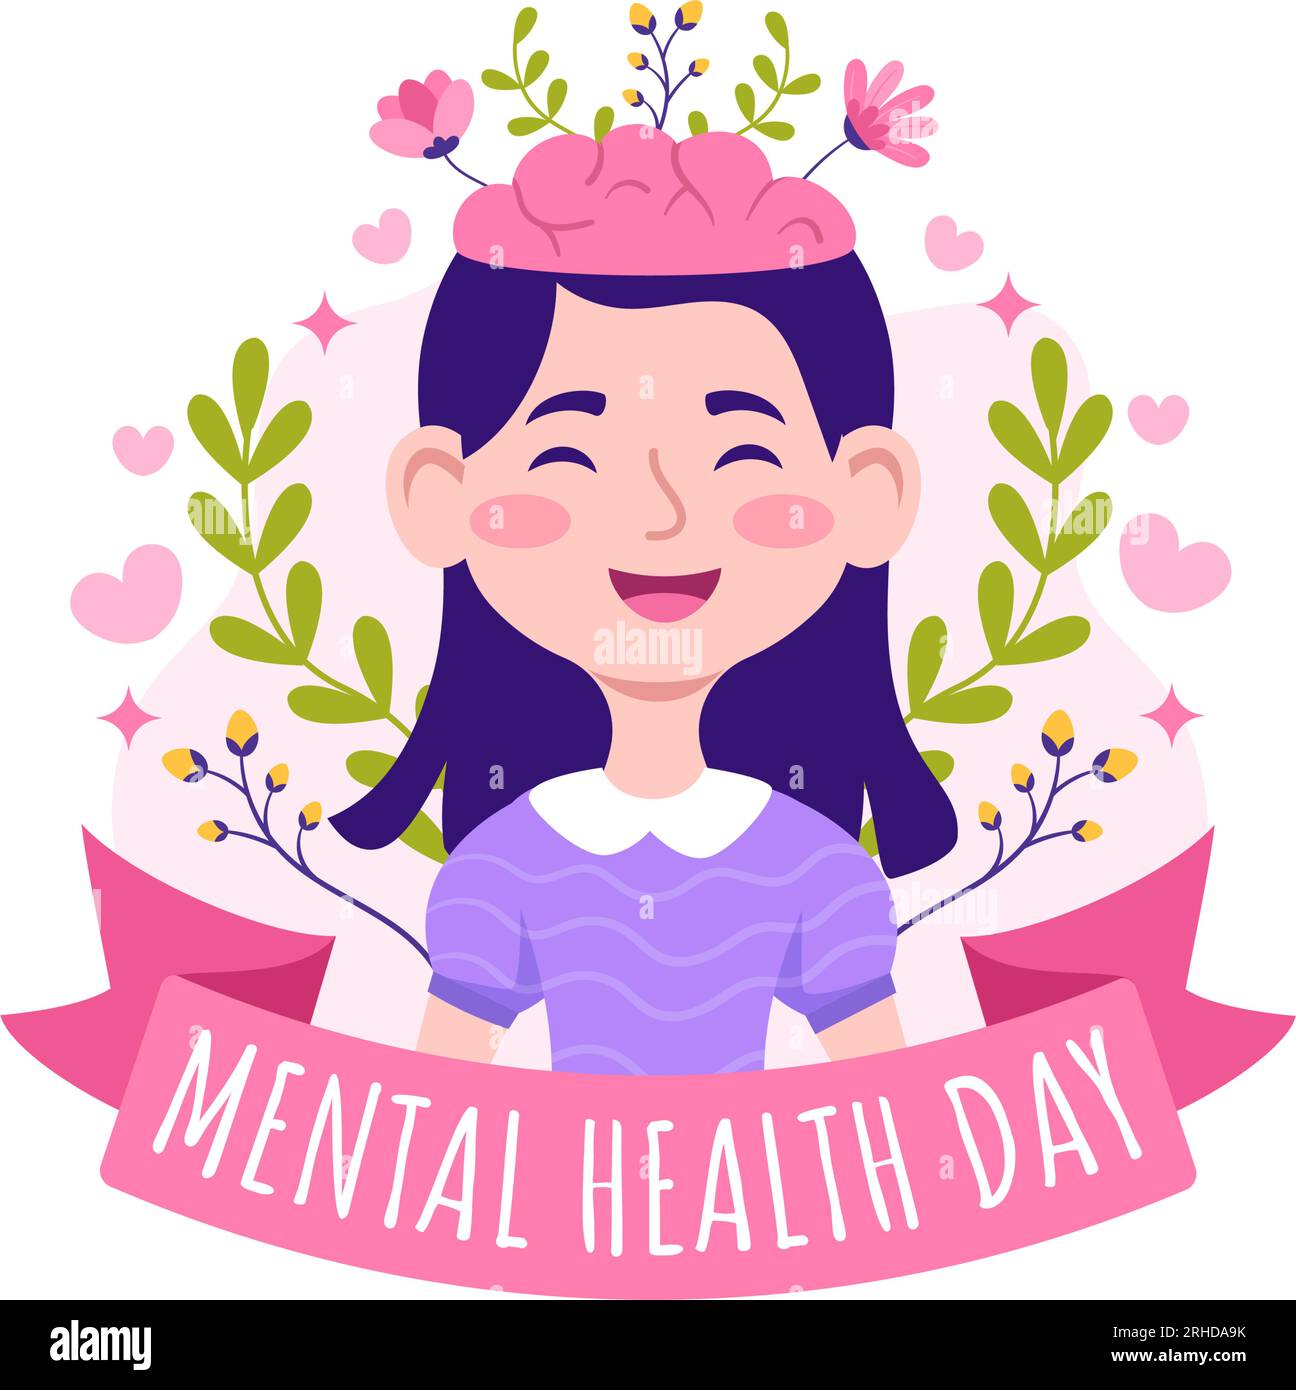 World Mental Health Day Vector Illustration on October 10 with Healthy Problem and Heart in Brain in Flat Cartoon Hand Drawn Background Templates Stock Vector